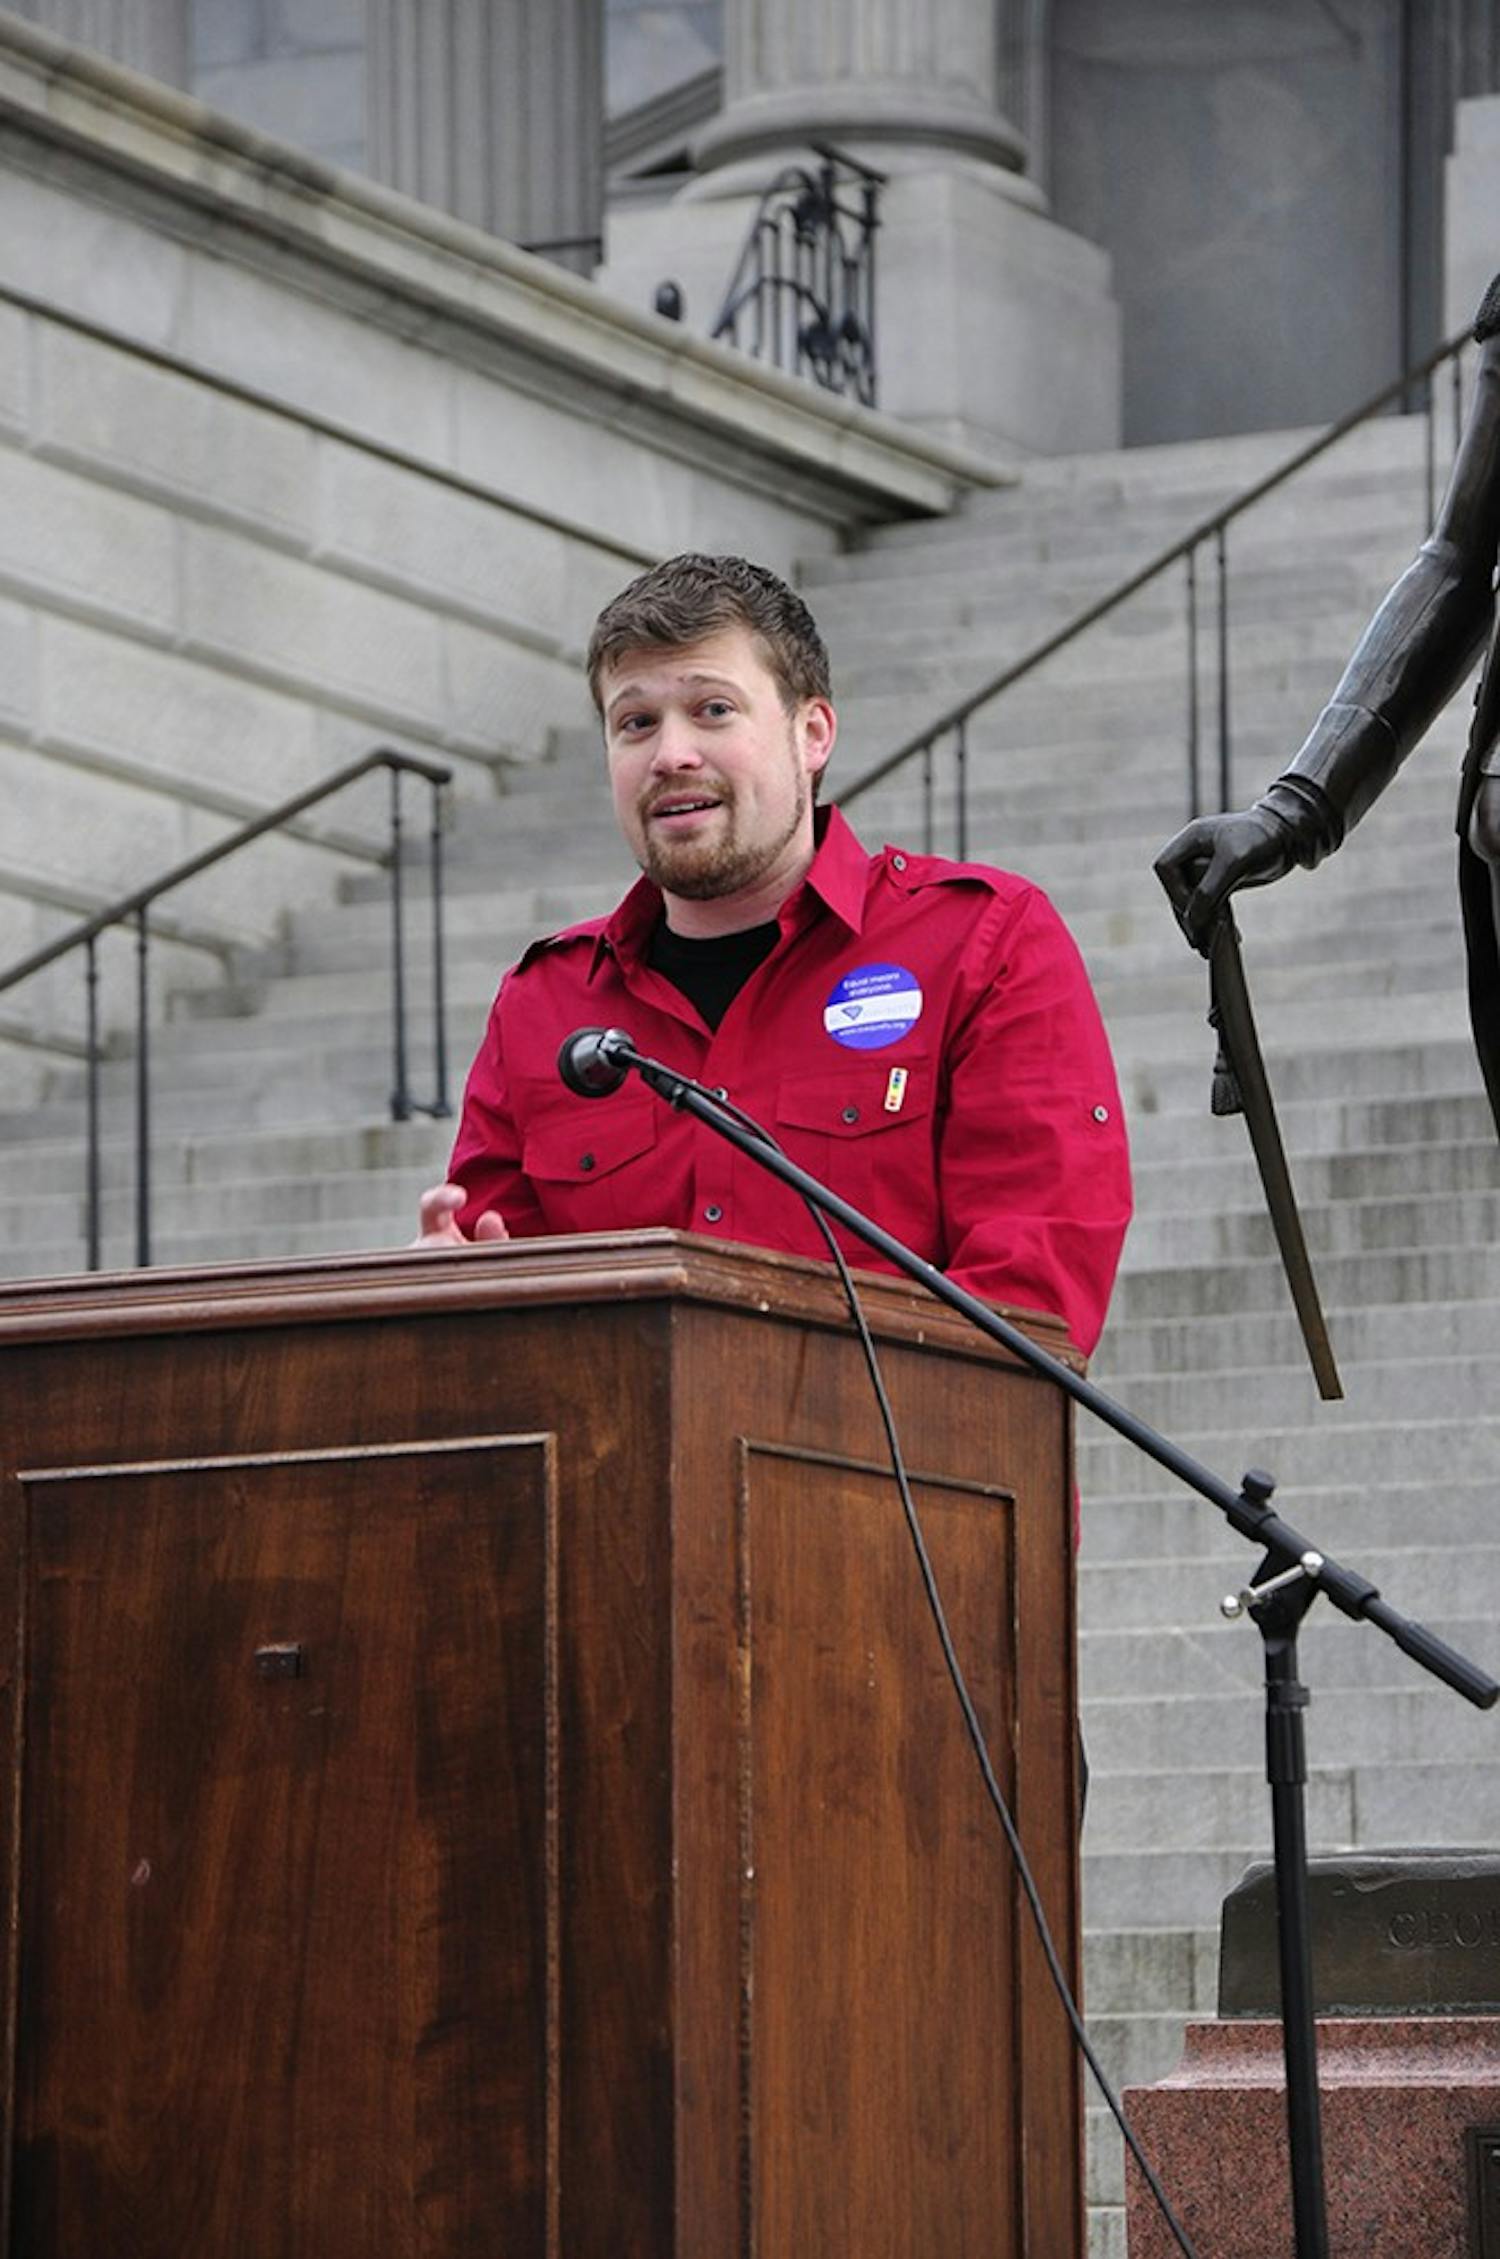 South Carolina Equality Executive Director Ryan Wilson spoke to a large crowd of same-sex marriage supporters at the Statehouse on Tuesday.